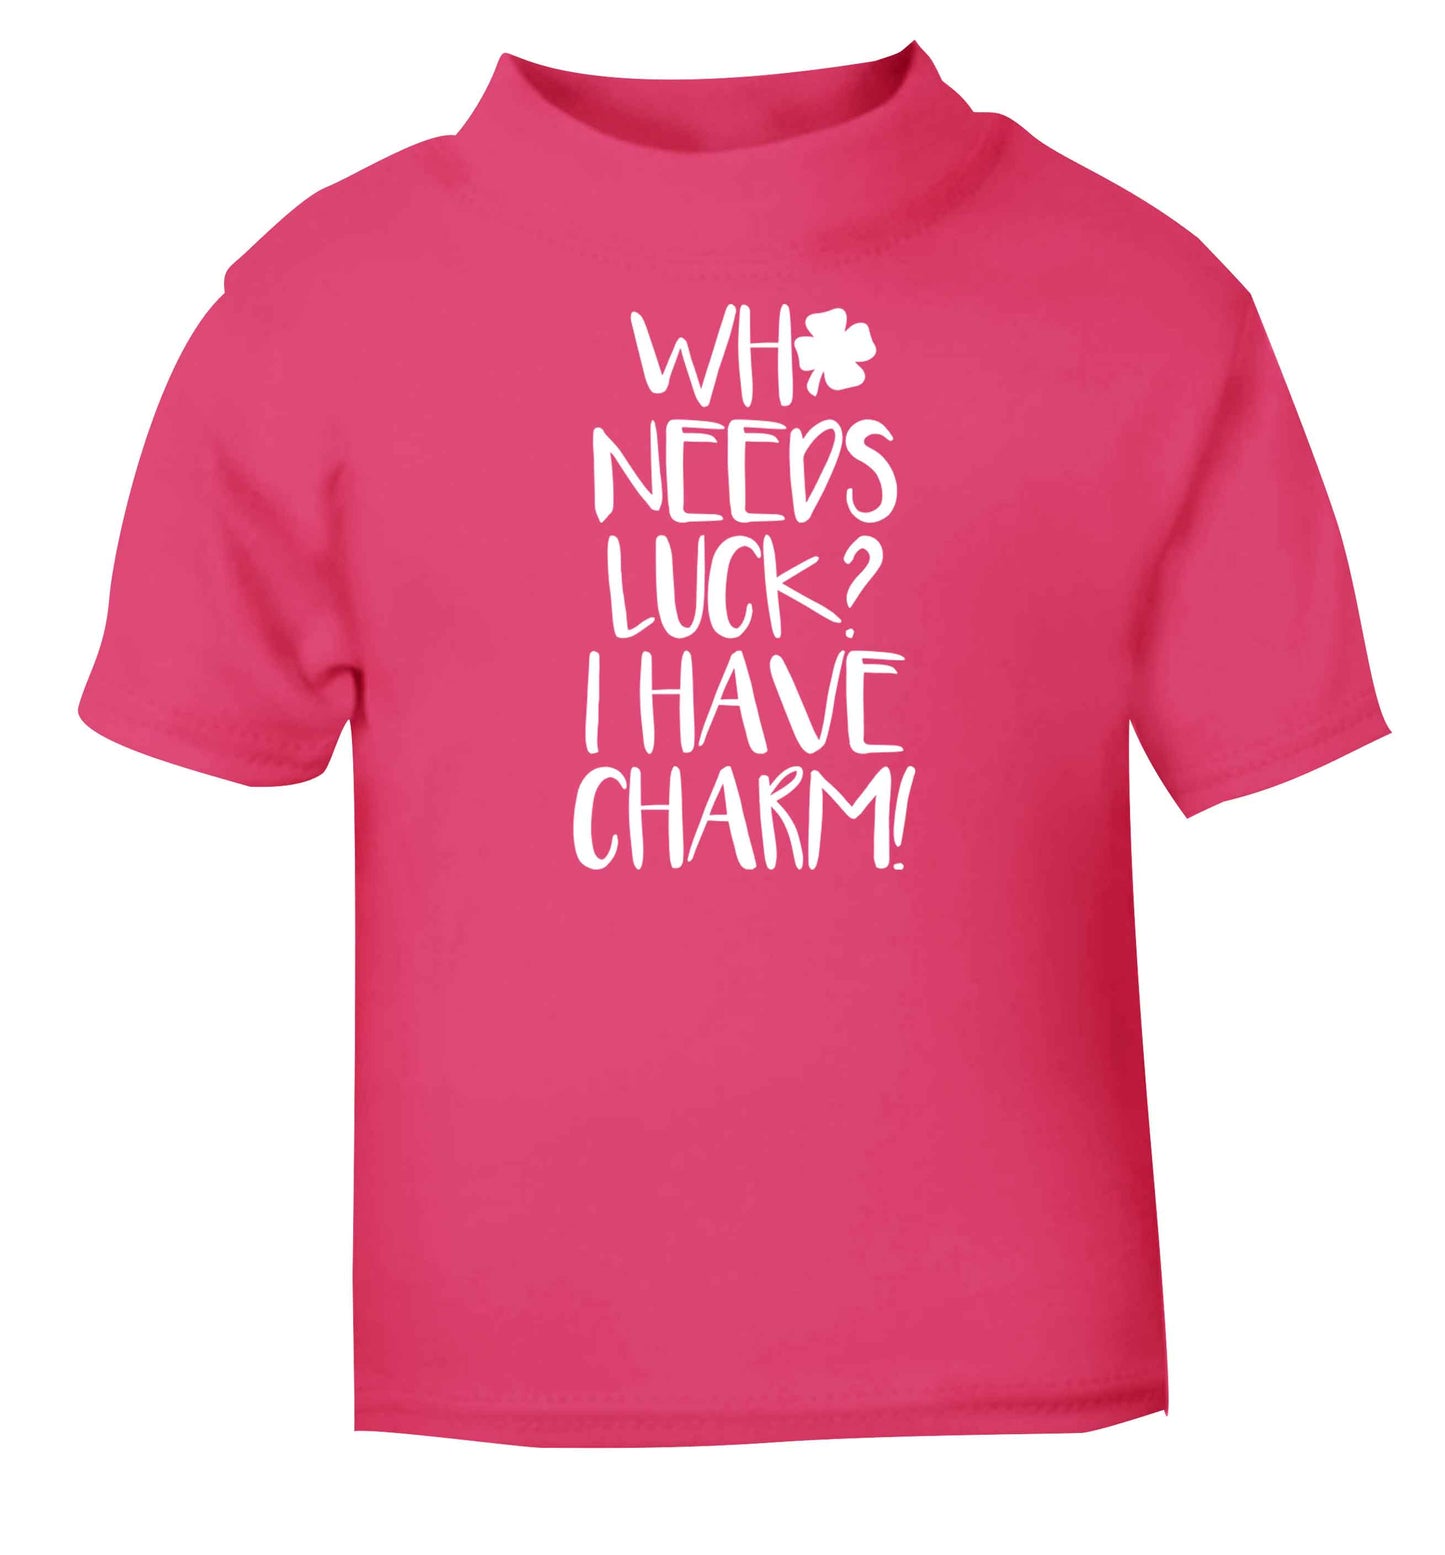 Who needs luck? I have charm! pink baby toddler Tshirt 2 Years